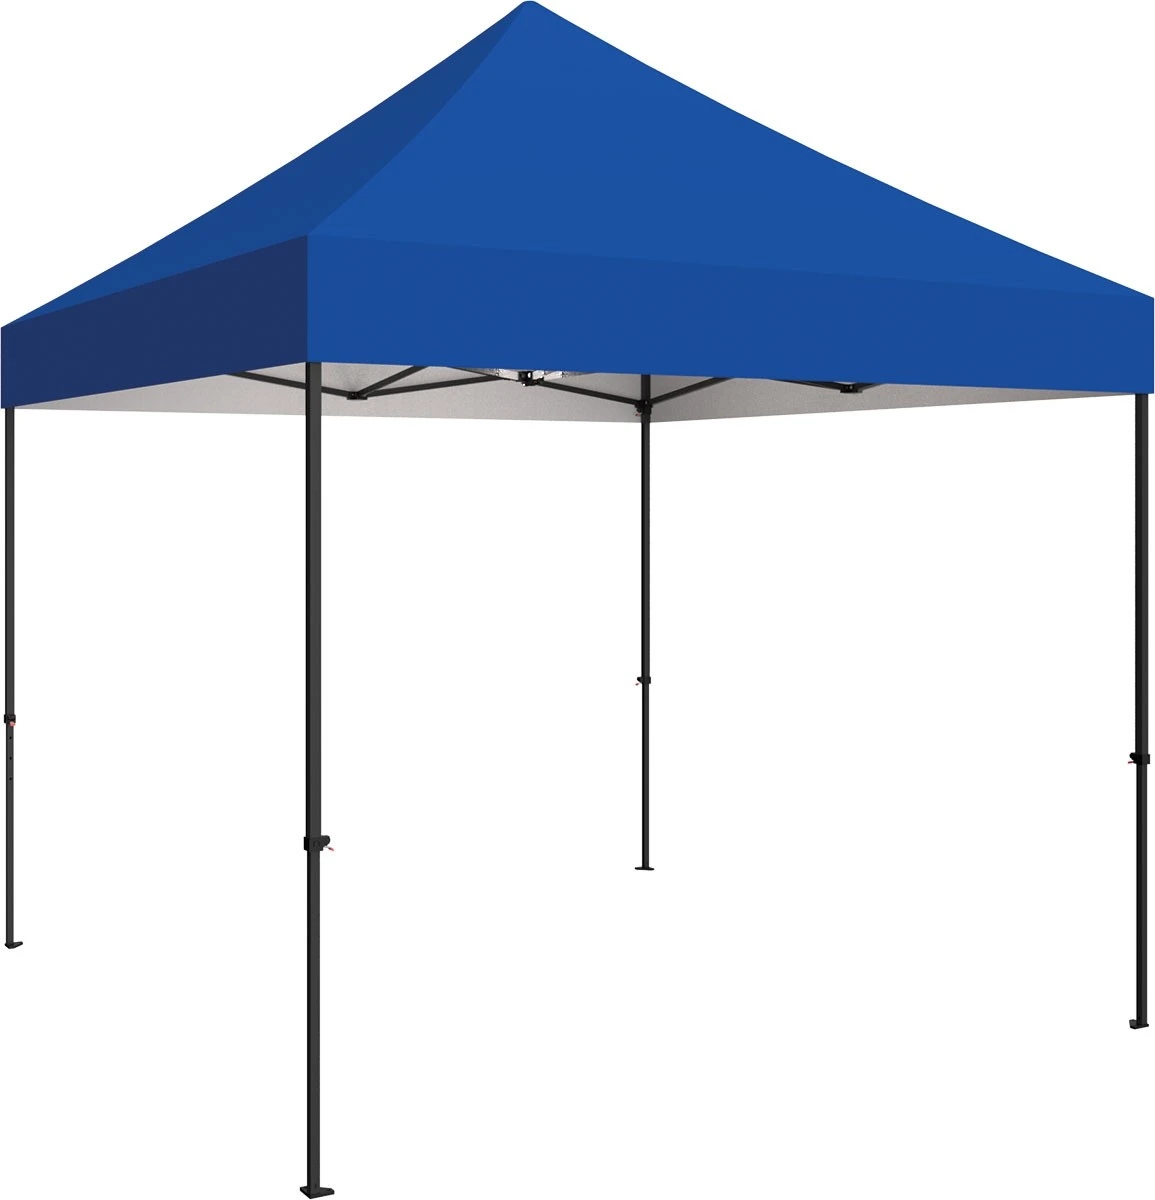 Canopy Pop Up Sports Events Pagoda Tent Move Canopy Tent Pop Up Tent